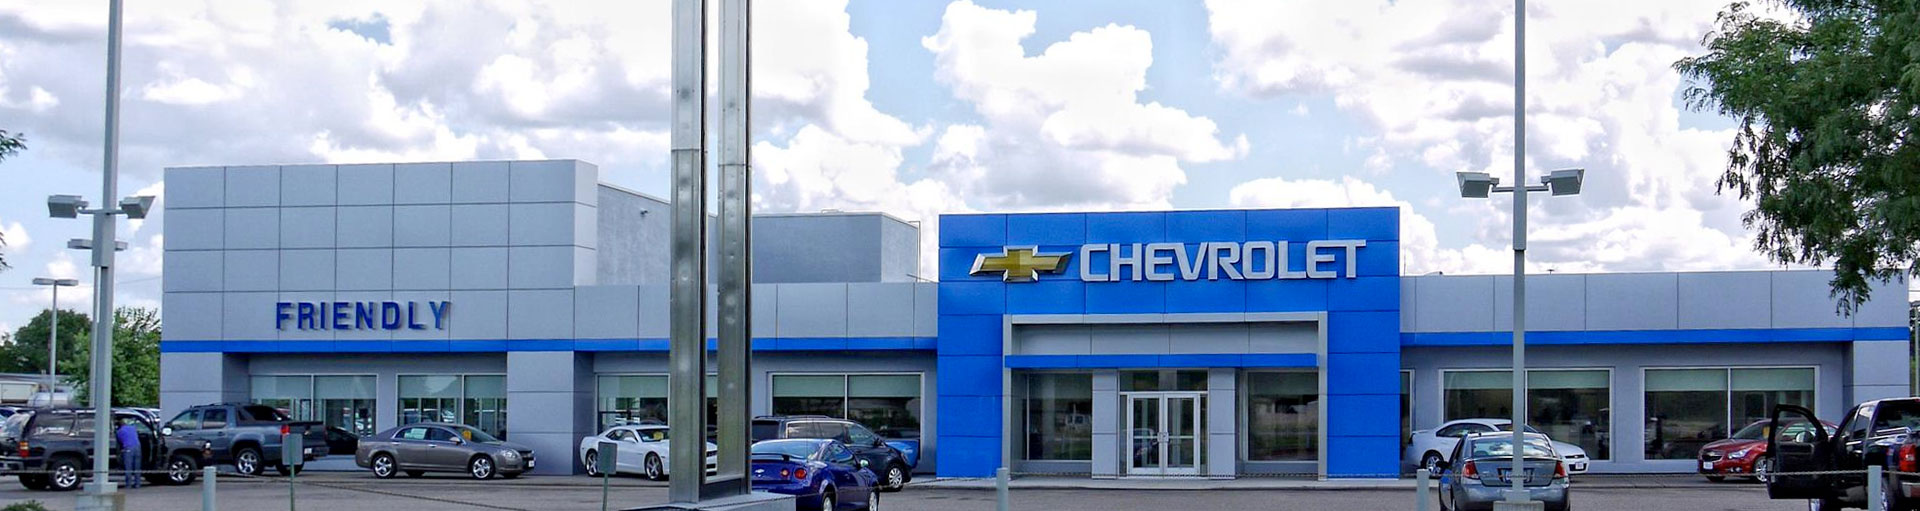 Friendly Chevrolet Brake Pad Replacement Service